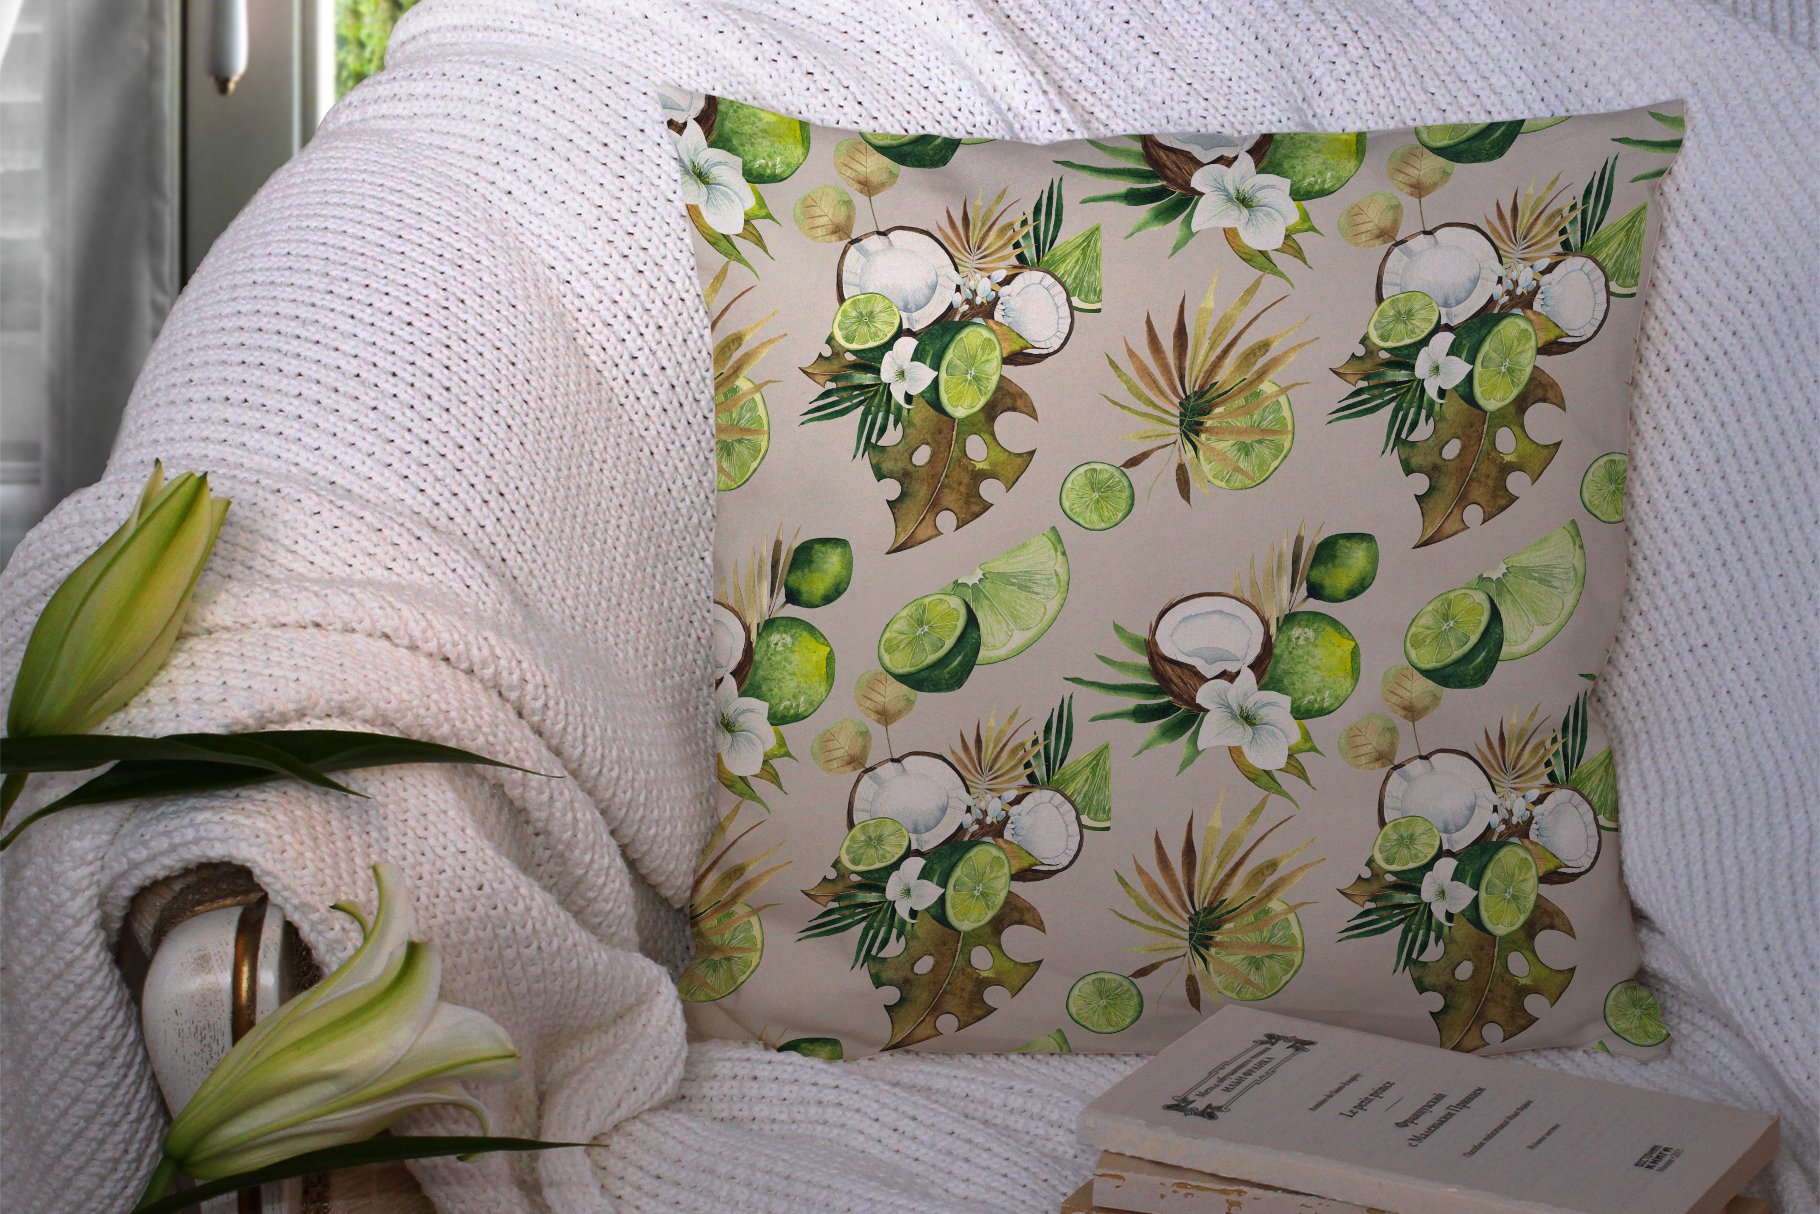 Decorate olive pillow with cute coconuts.